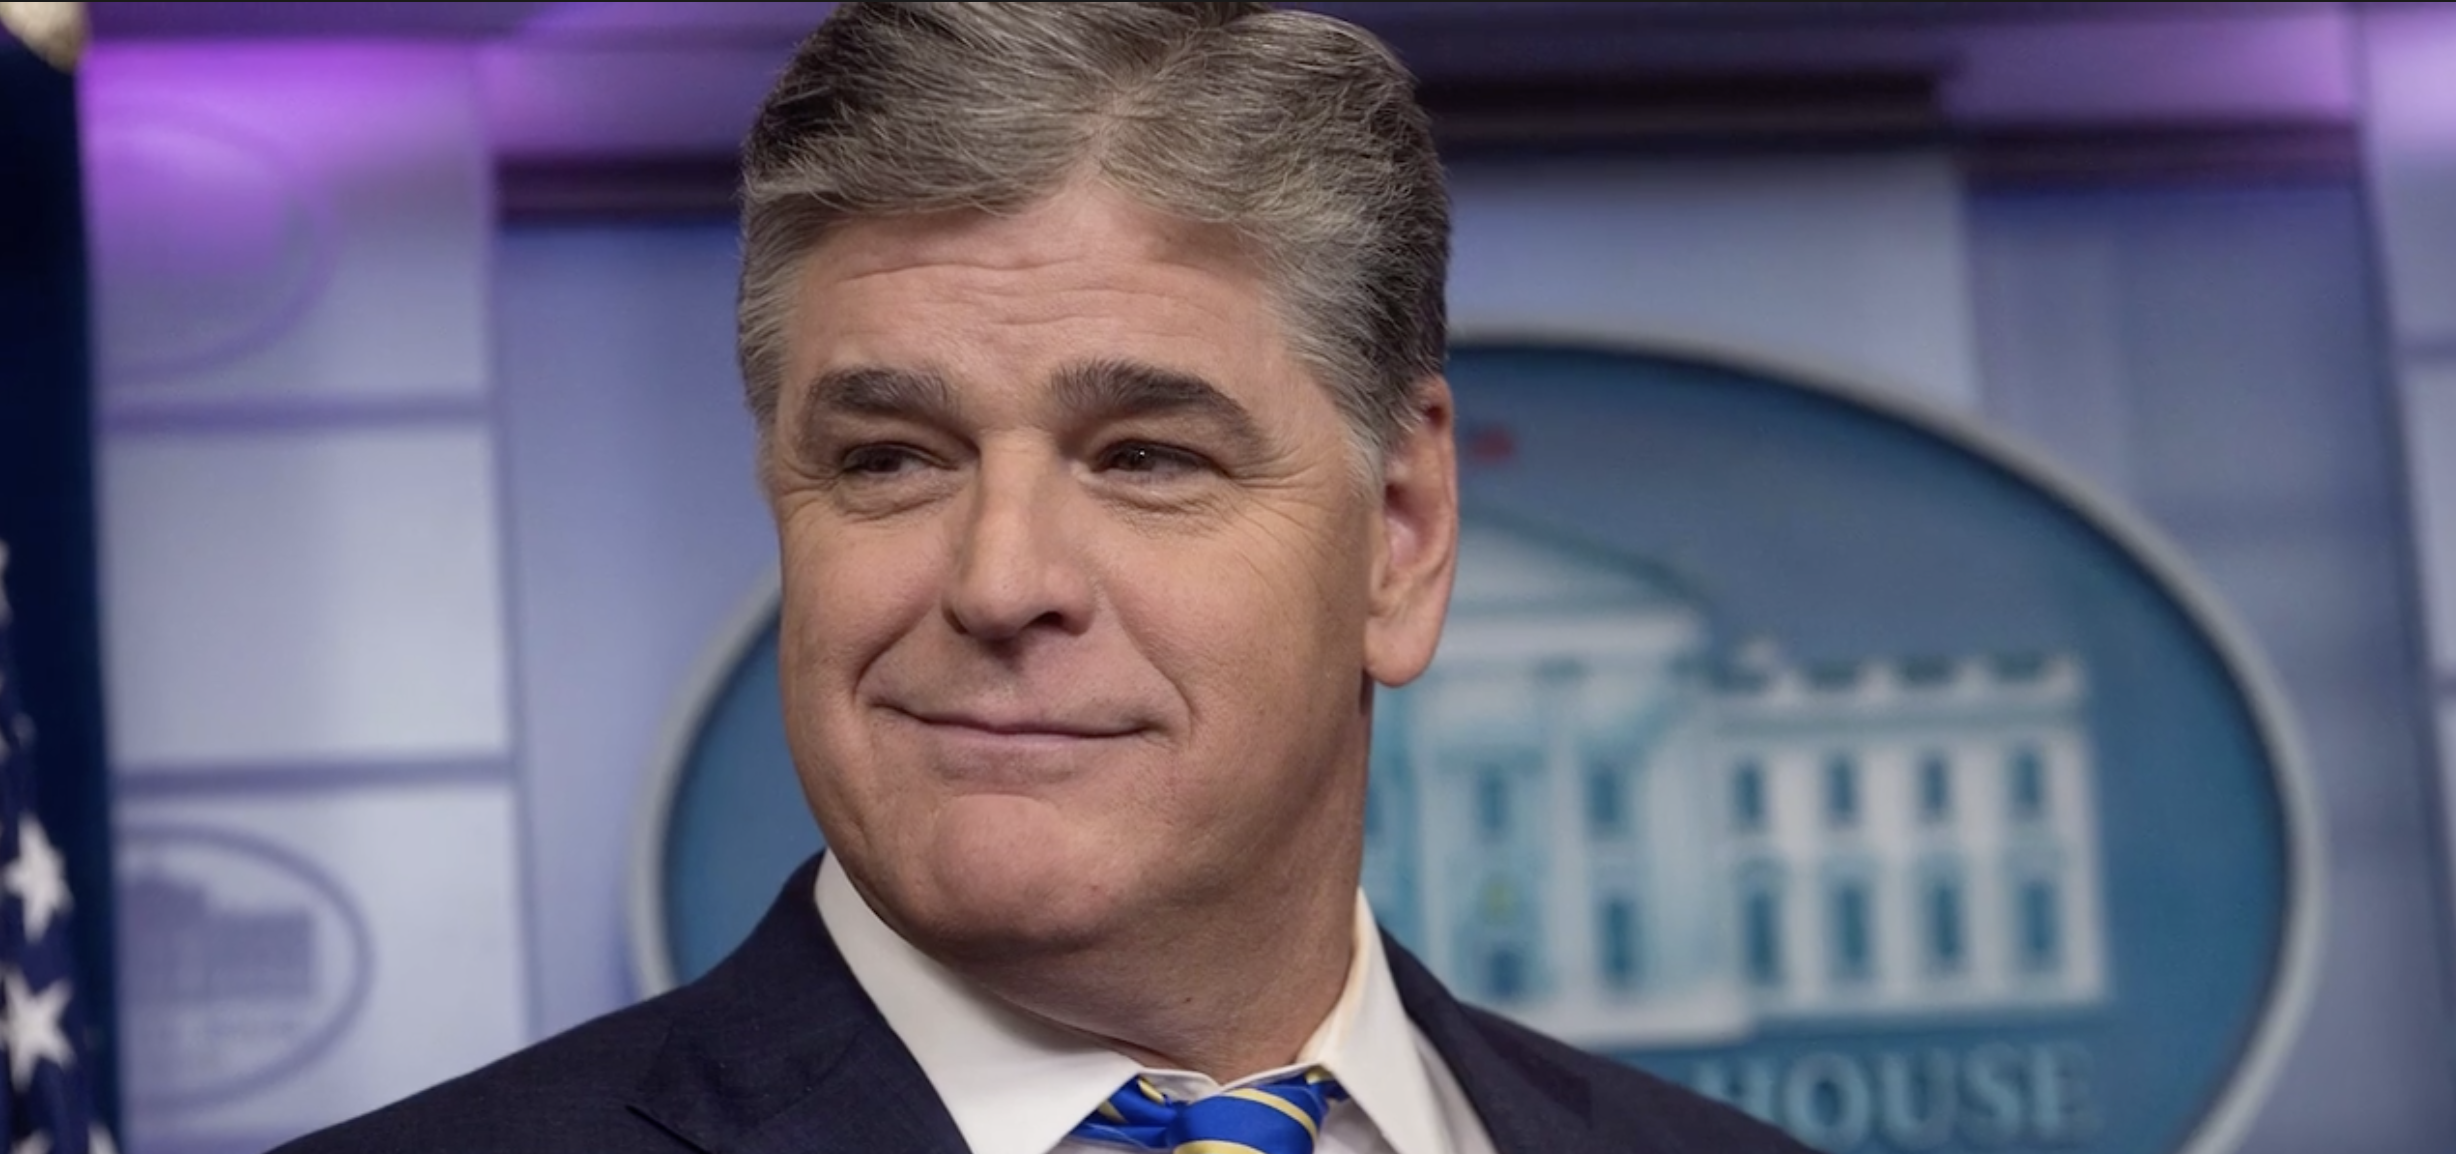 Sean Hannity calls for unity from Democrats and Republicans: 'You must stop this insanity'